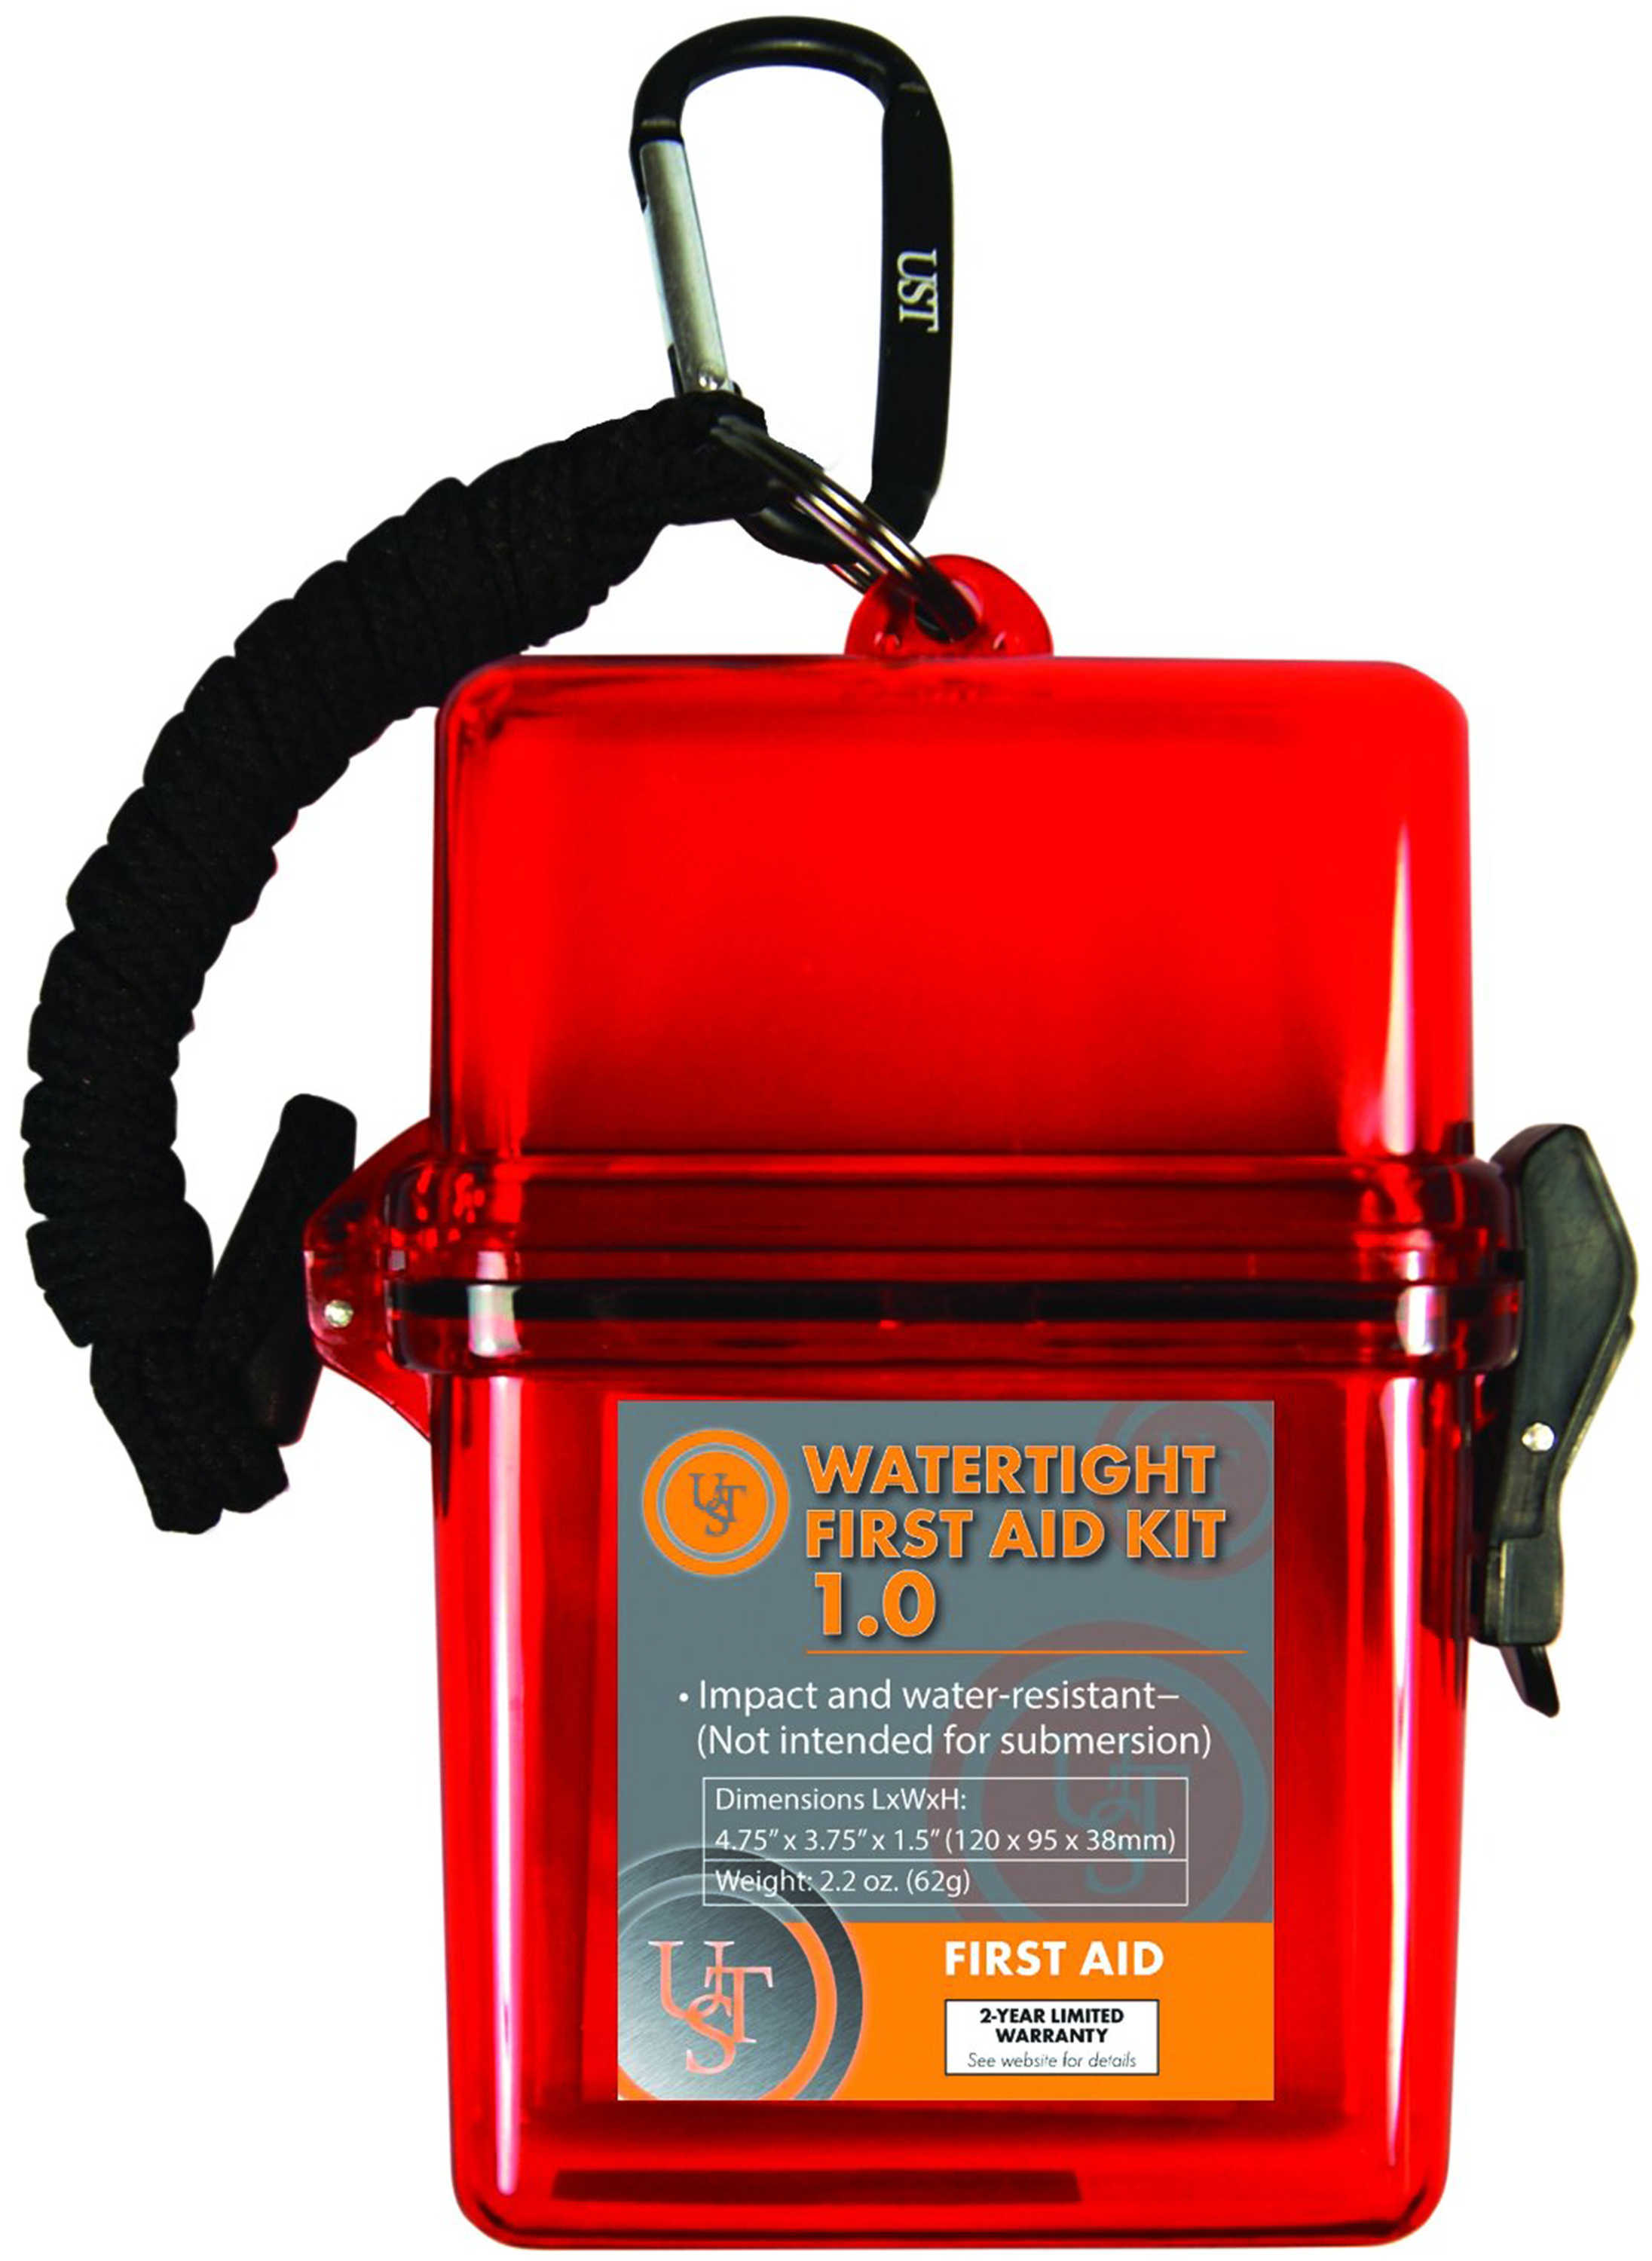 Ultimate Survival Technologies Watertight First Aid Kit 1.0, Red Md: 80-30-1465